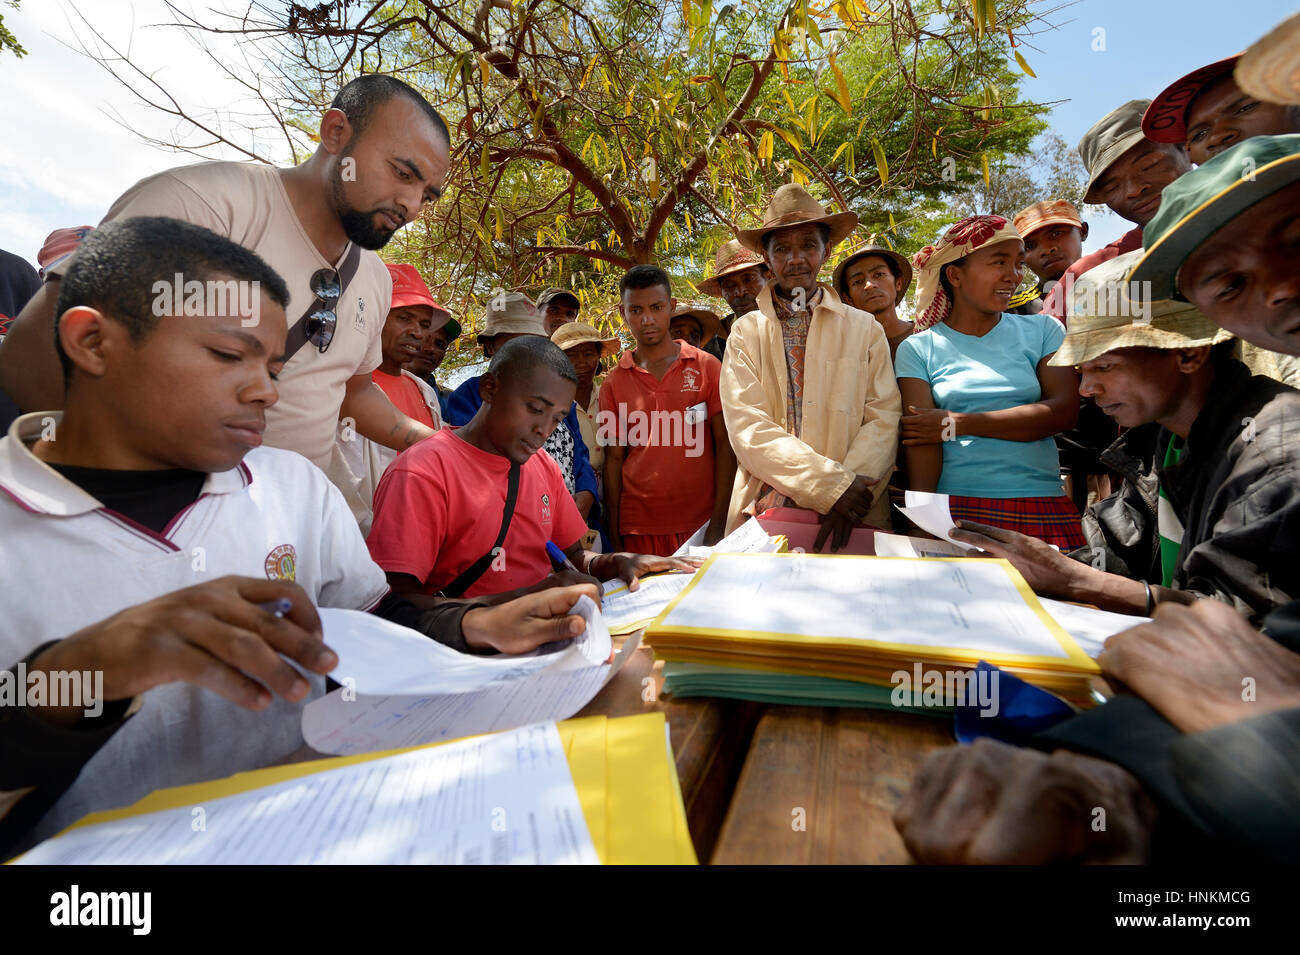 Villagers fill out applications for certification of their land on the village square, Analakely village, Tanambao commune Stock Photo